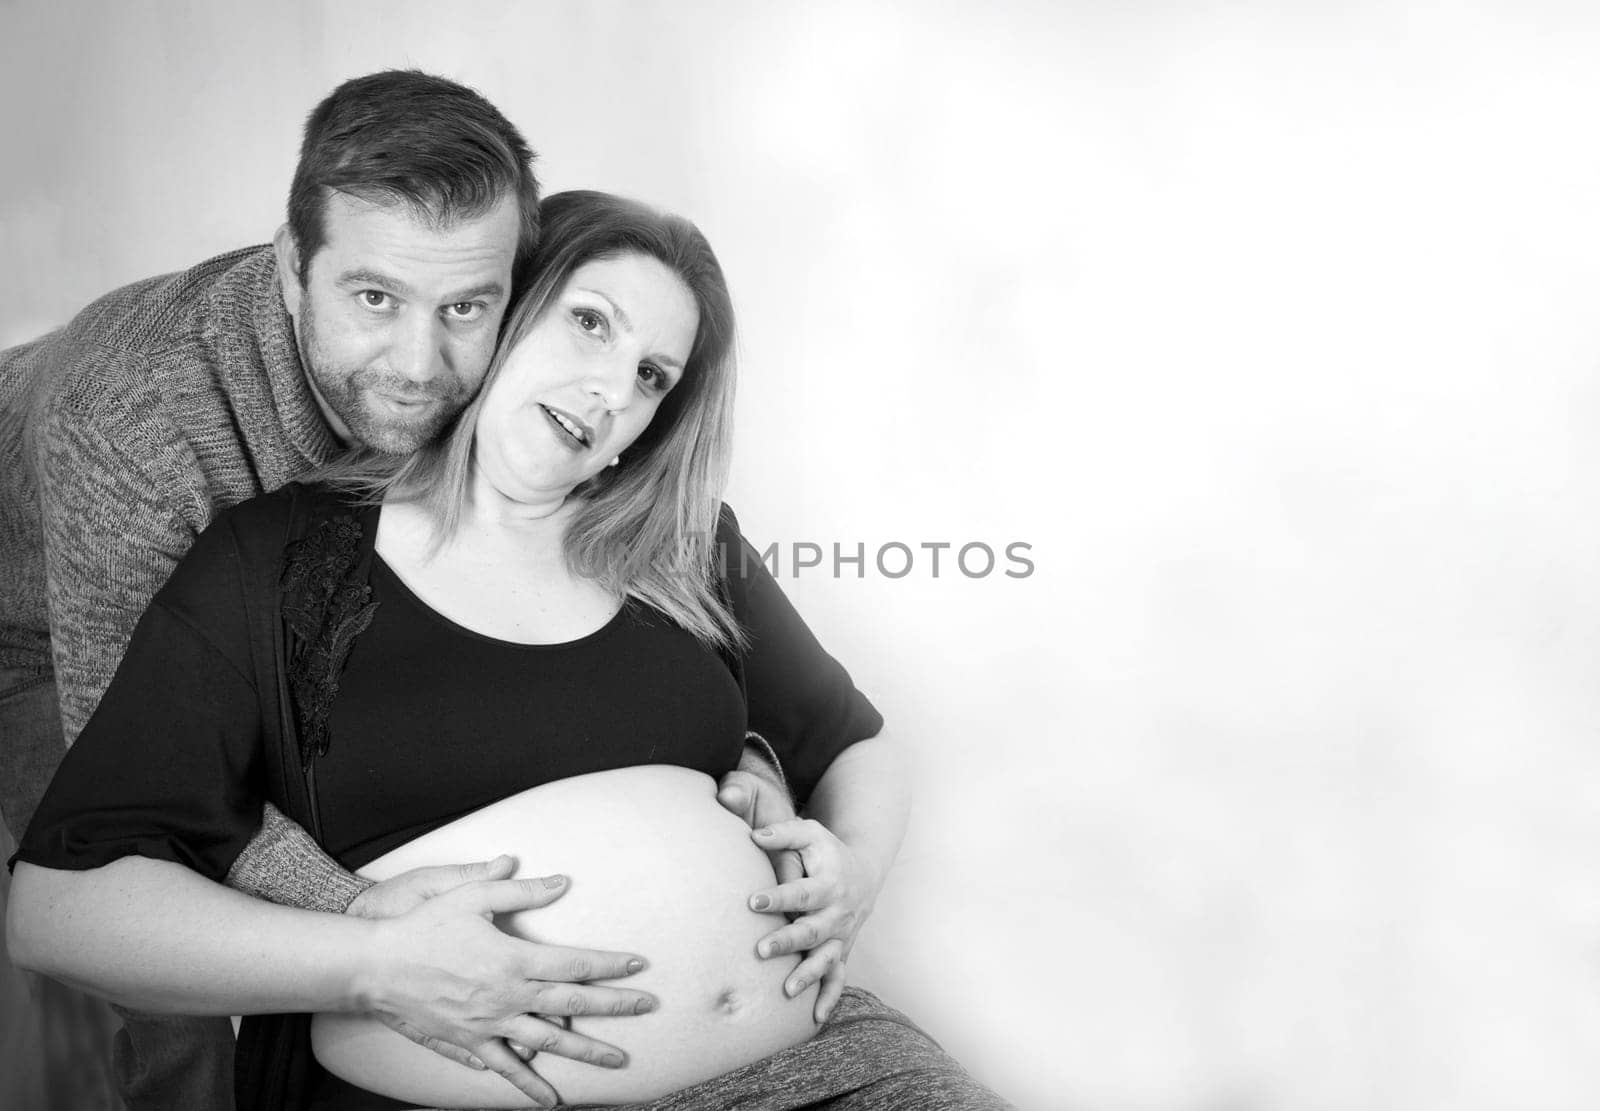 Eight months pregnant woman and dad hugging her. Happy expression